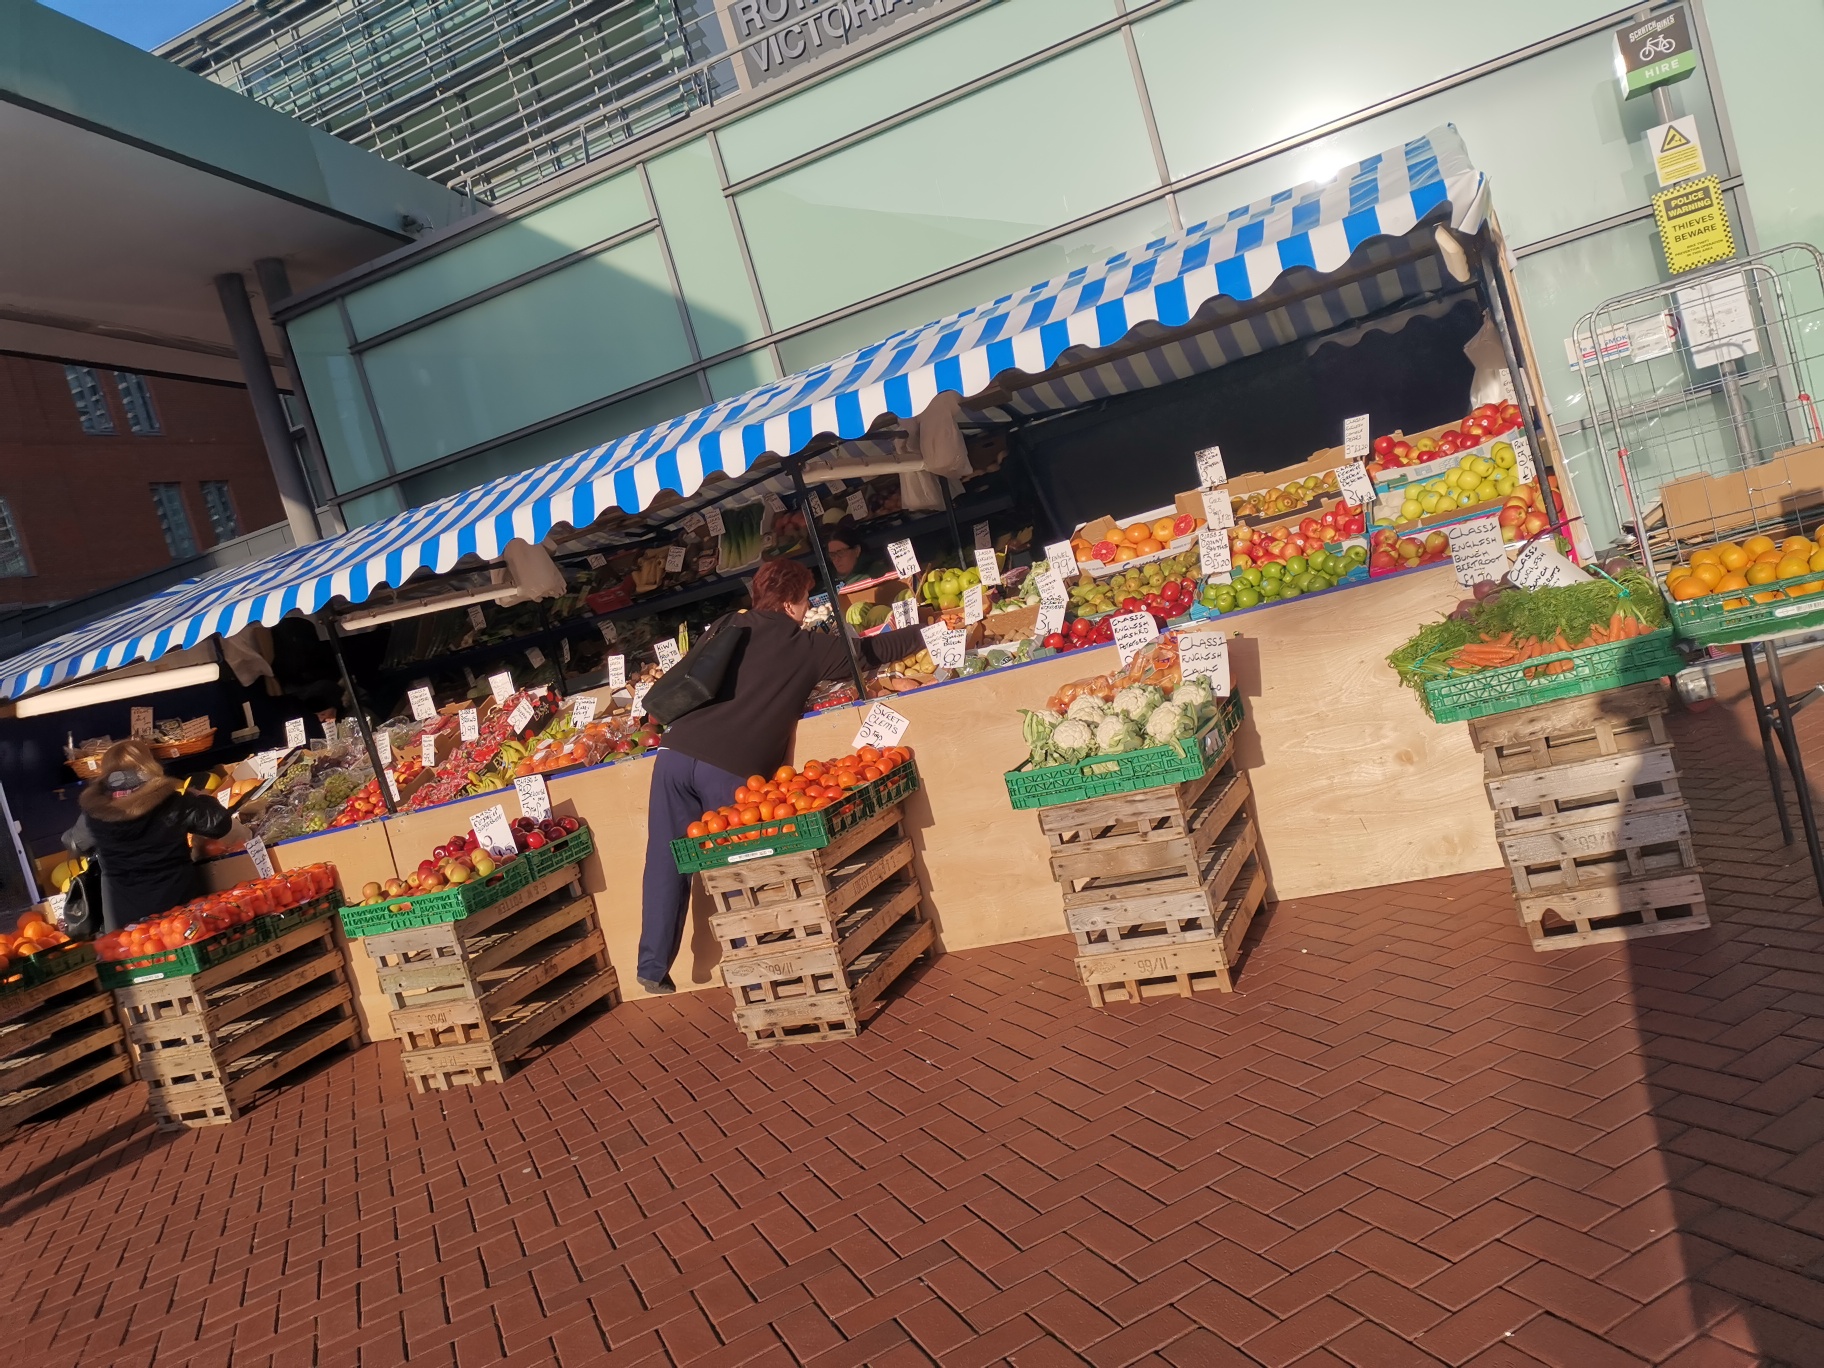 Photograph of fruit and vegetable stall